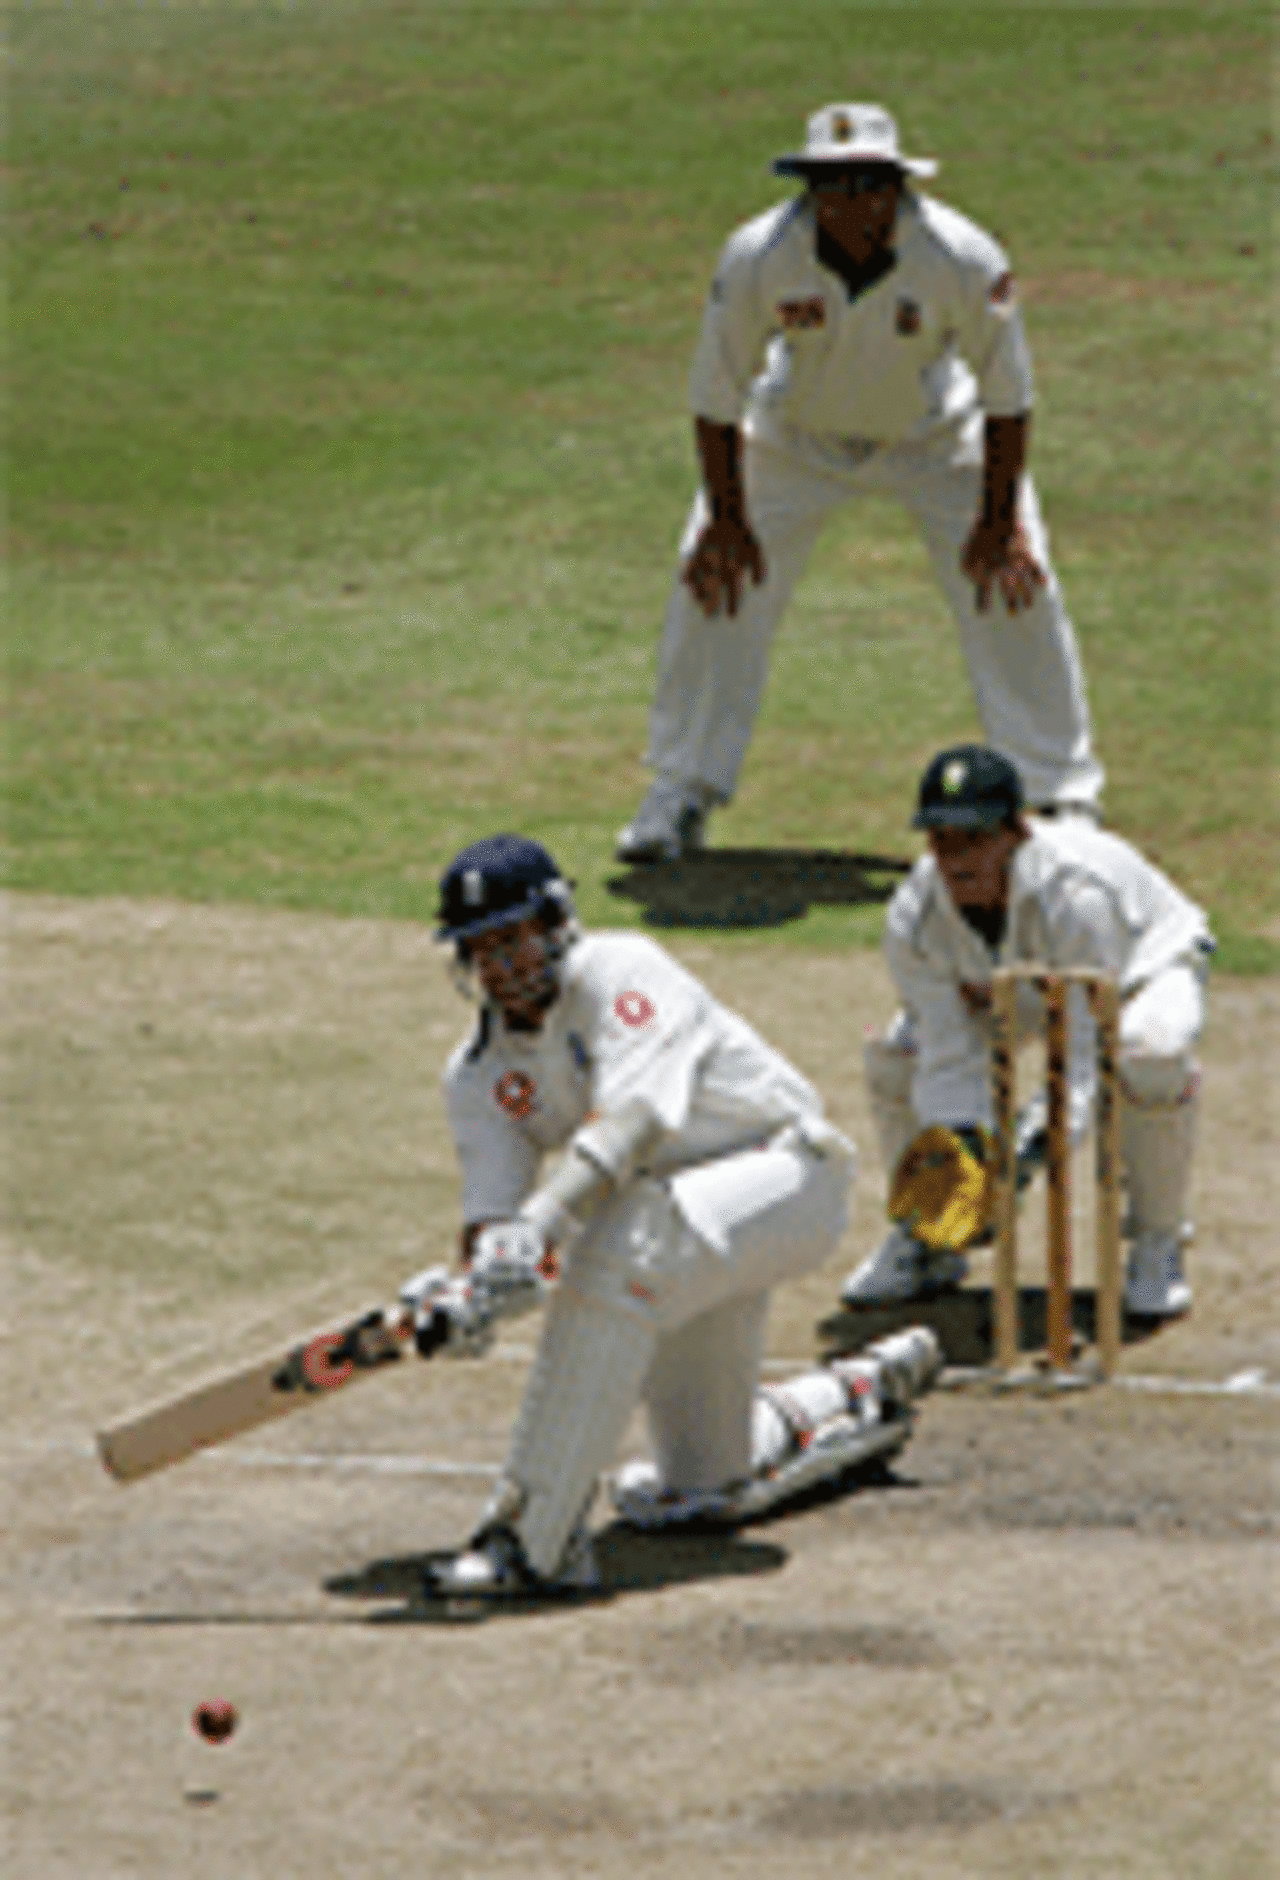 Ashley Giles mounts a rearguard action on the final day at Cape Town, South Africa v England, 3rd Test, January 6, 2005